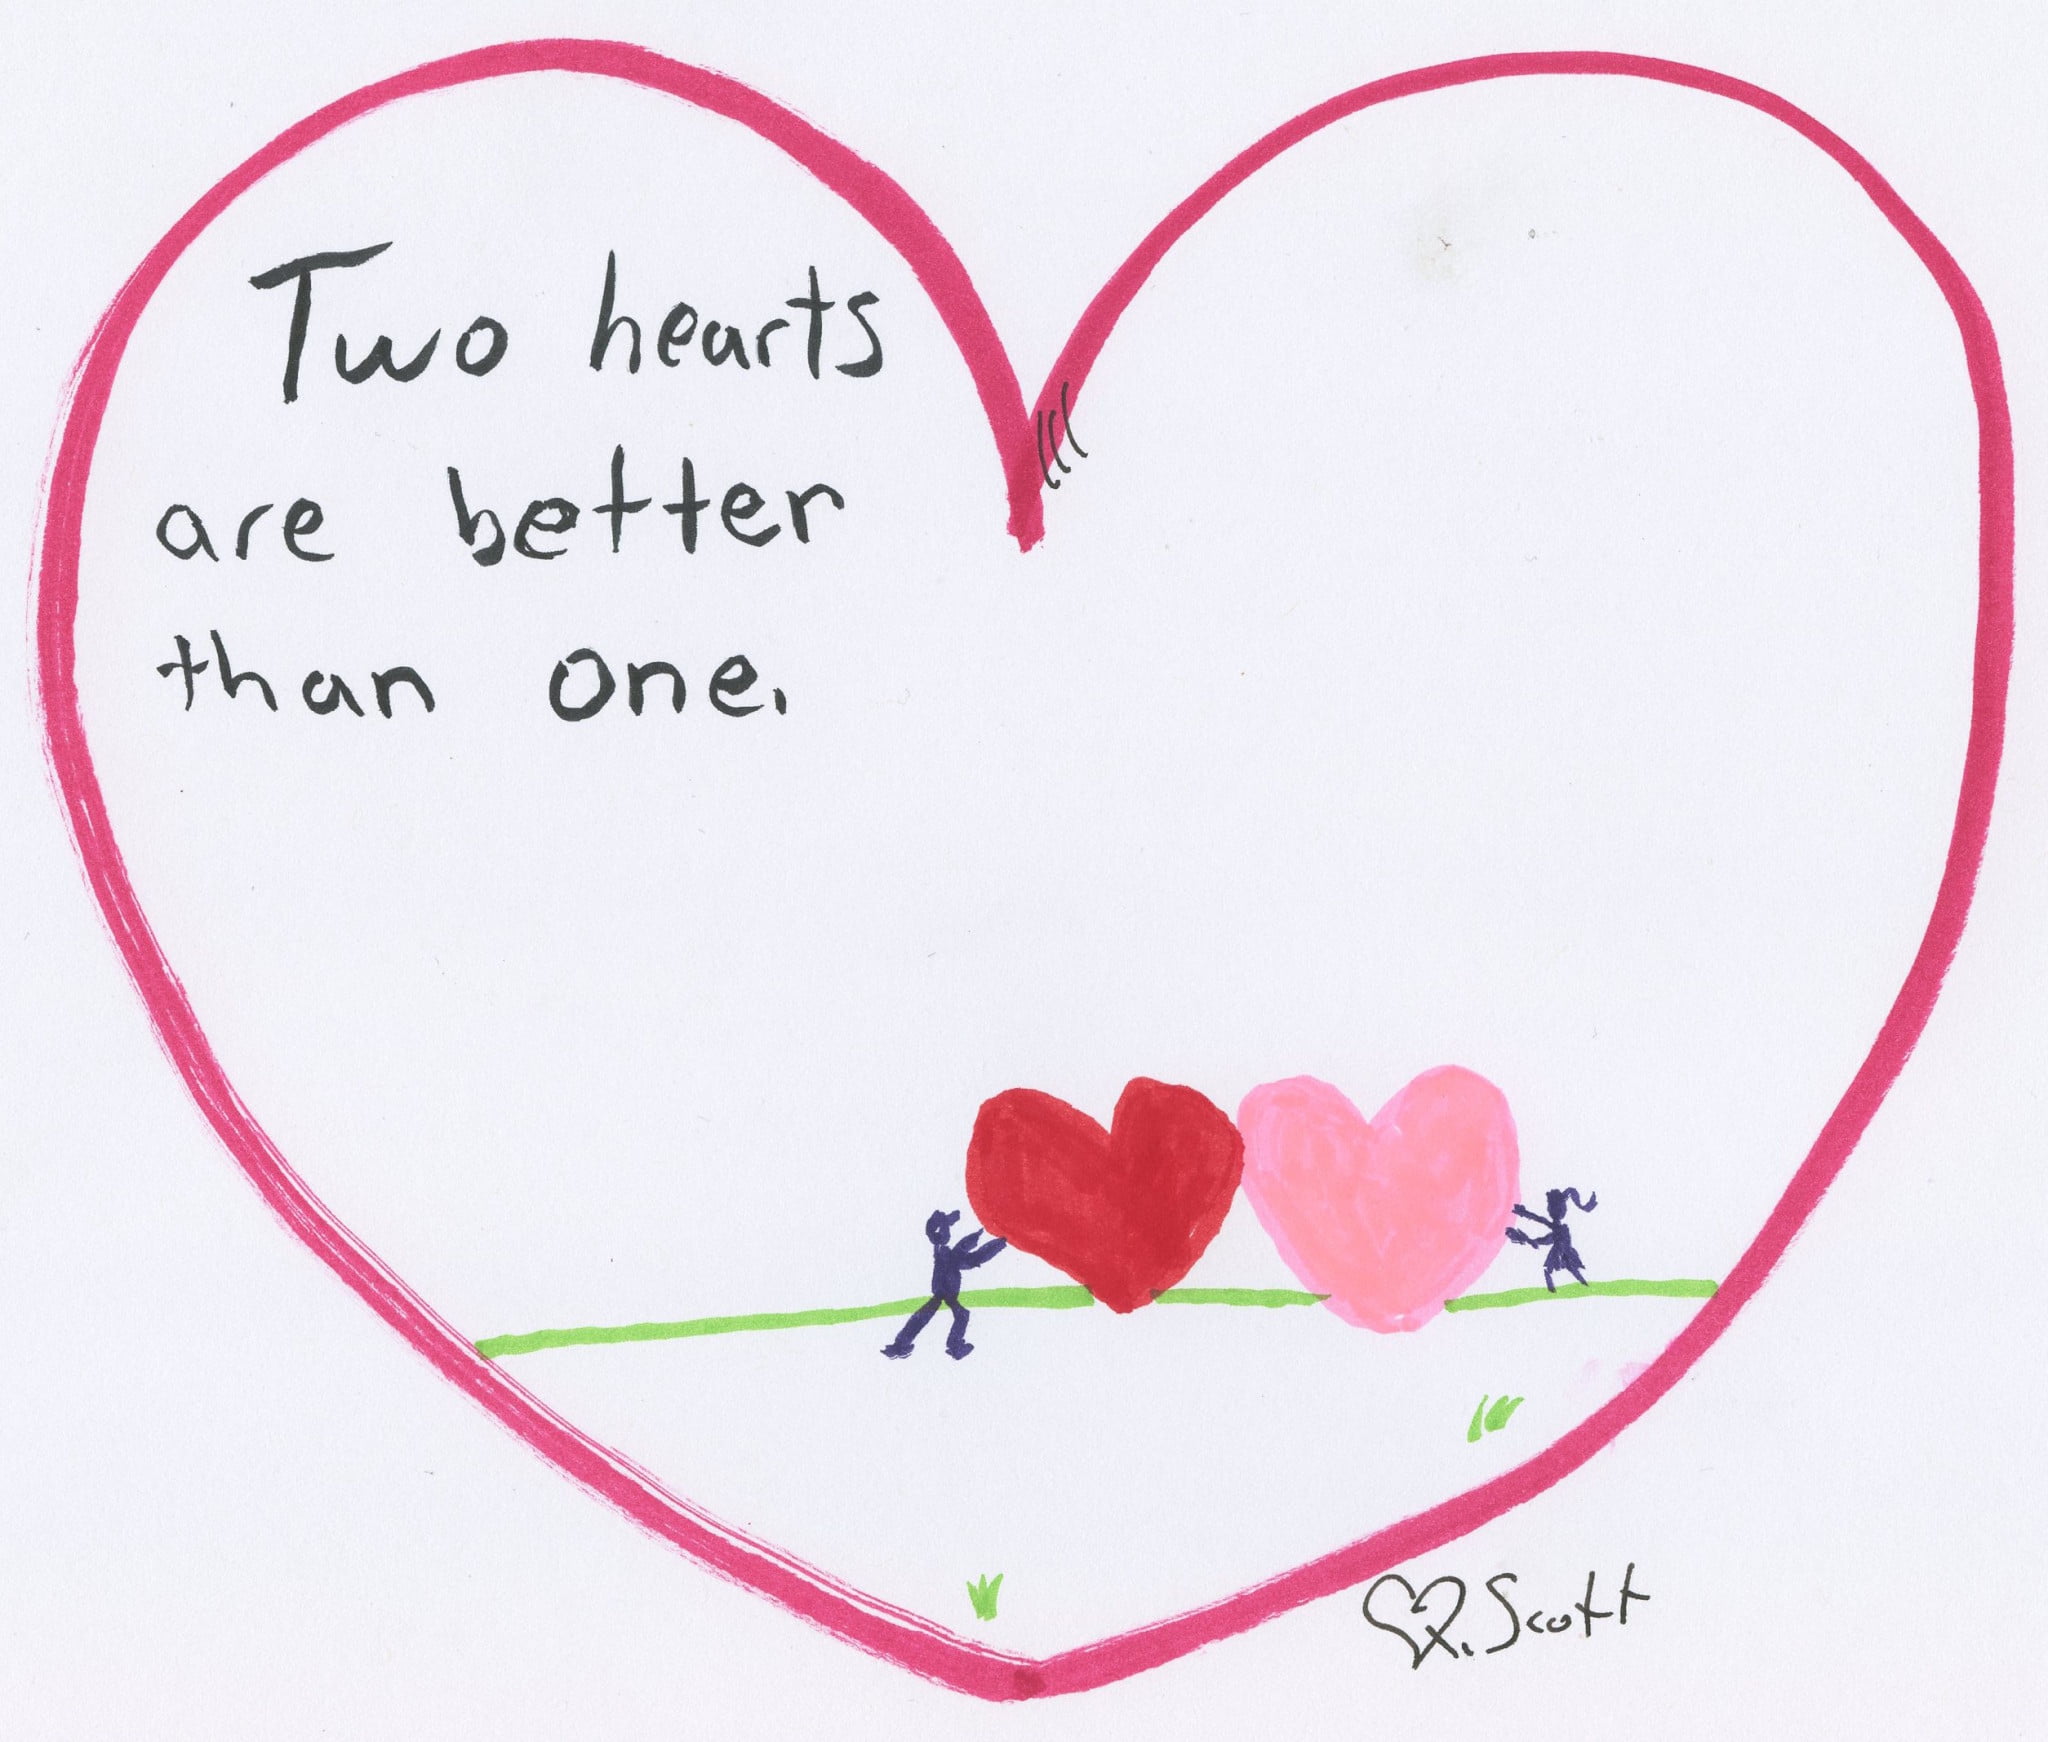 Two hearts are better than one